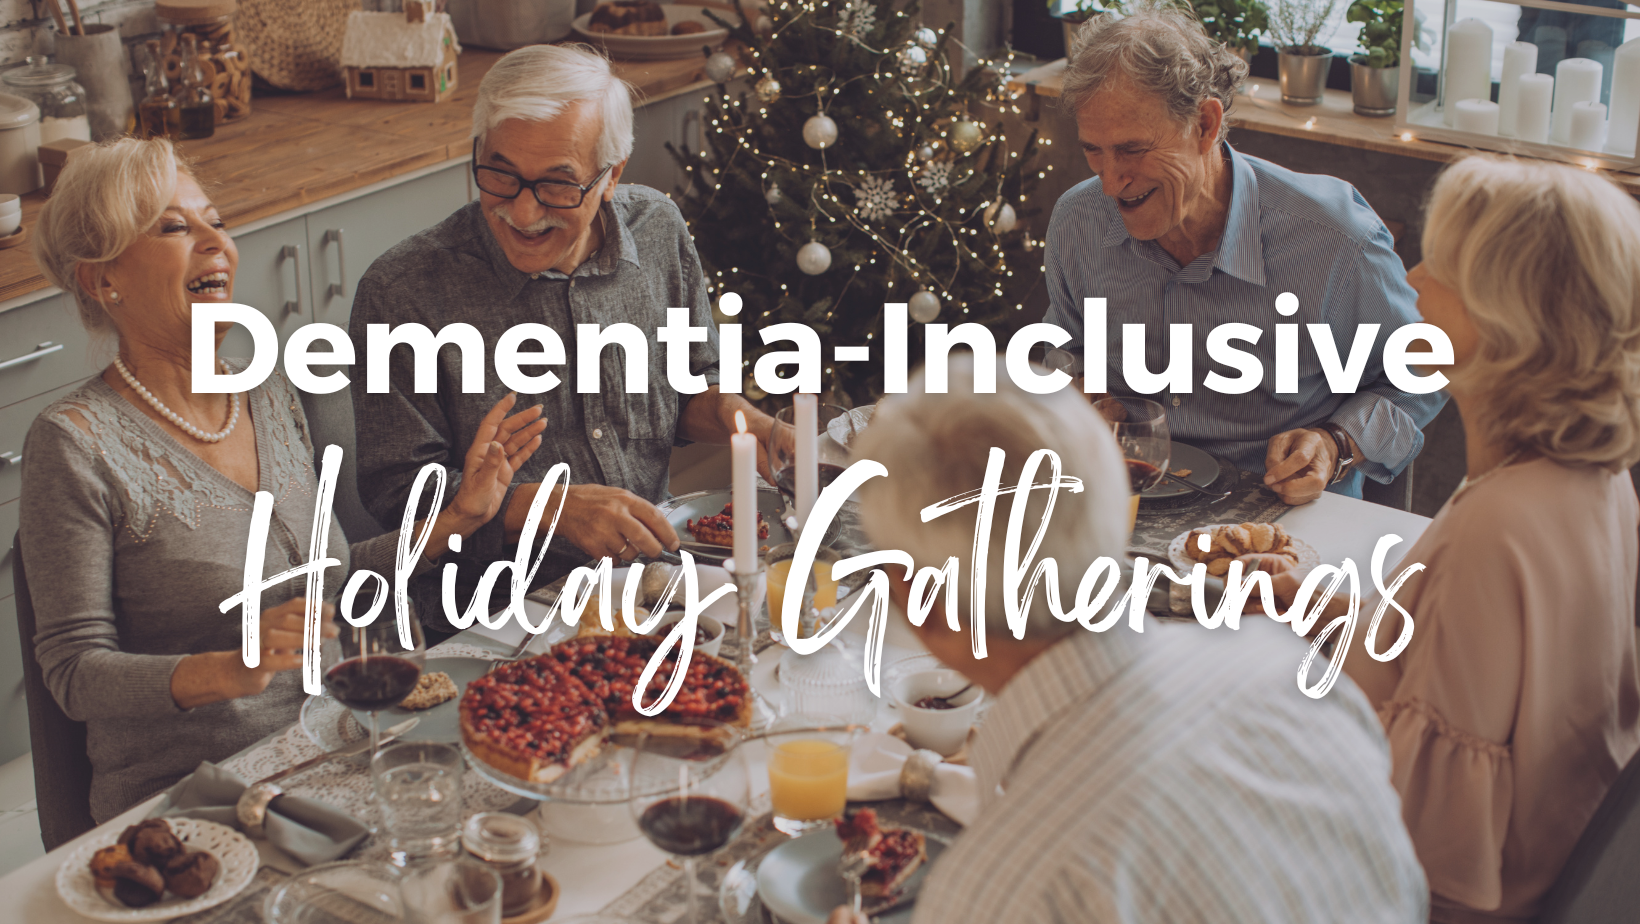 How to make holiday gatherings dementia-inclusive